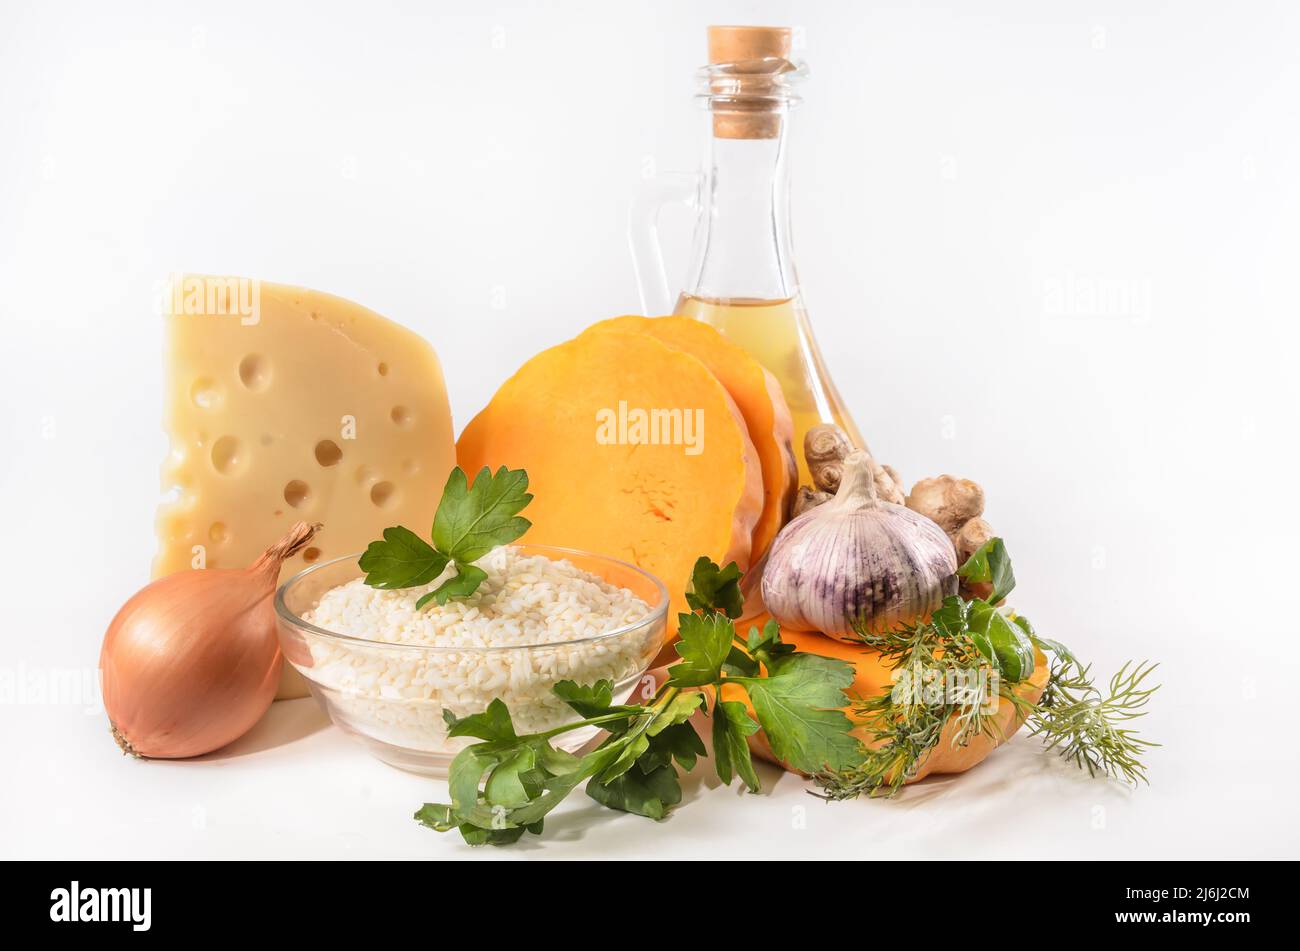 pumpkin and ingredients for pumpkin casserole with rice on a light background Stock Photo